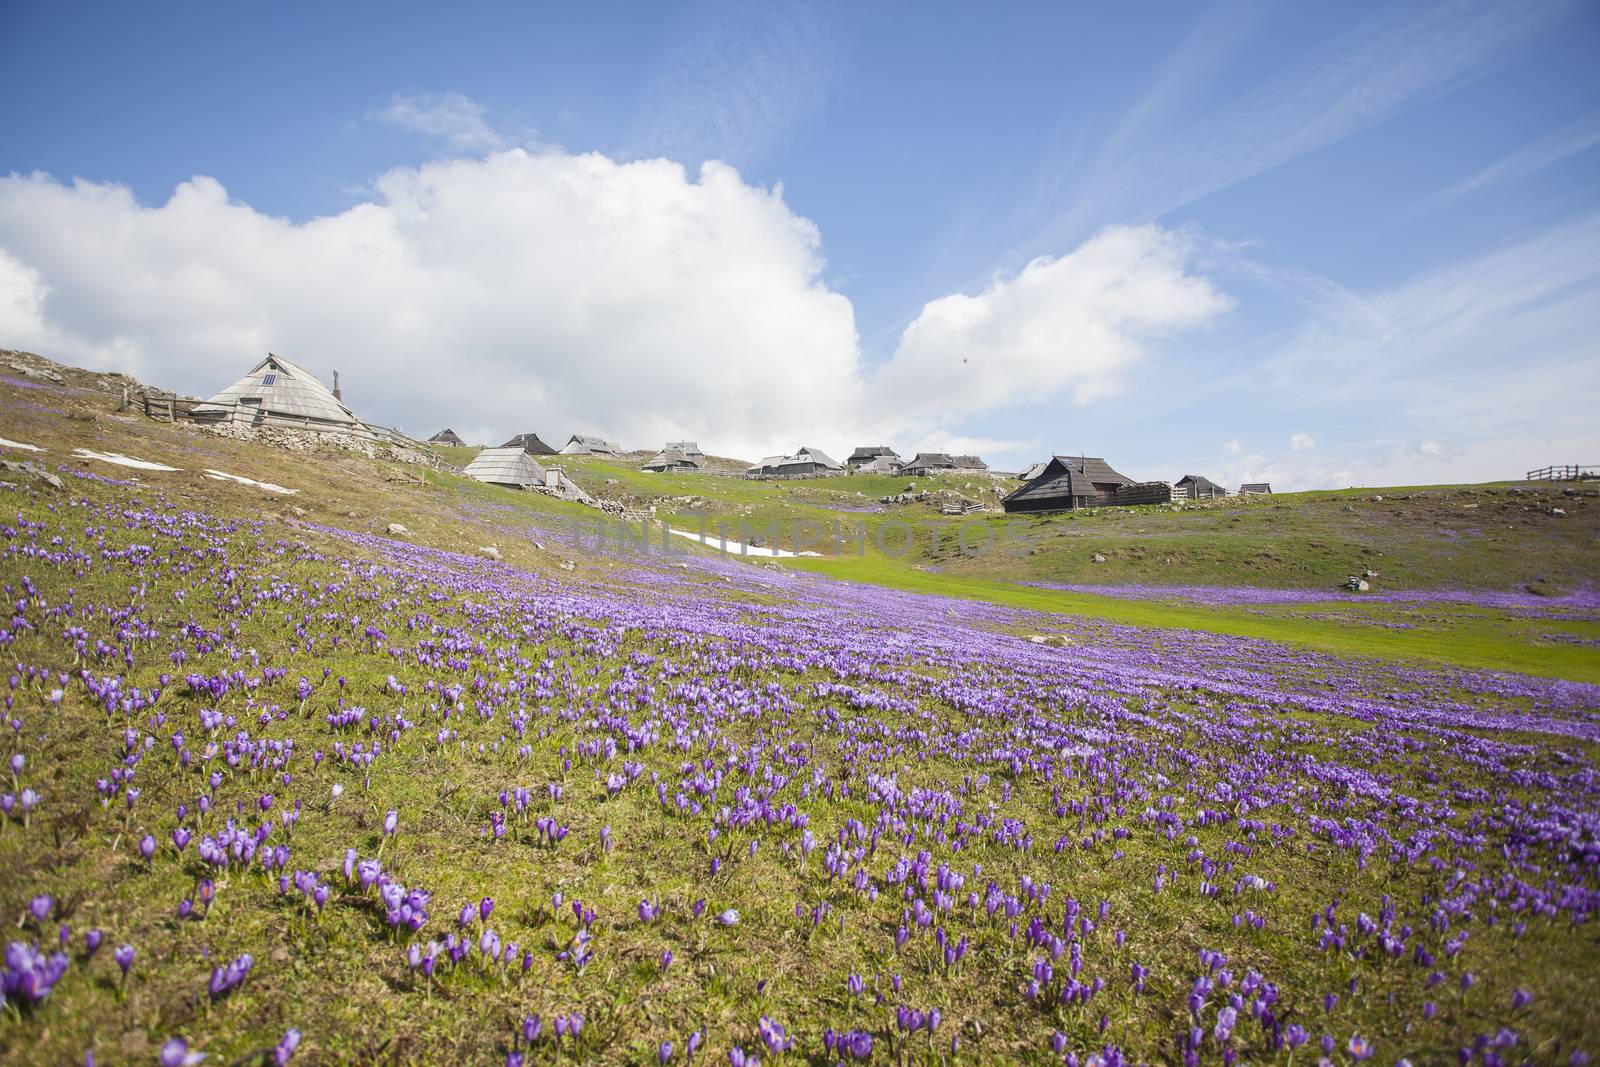 Spring crocuses on Velika Planina plateau in Slovenia. With cottage in the background.
